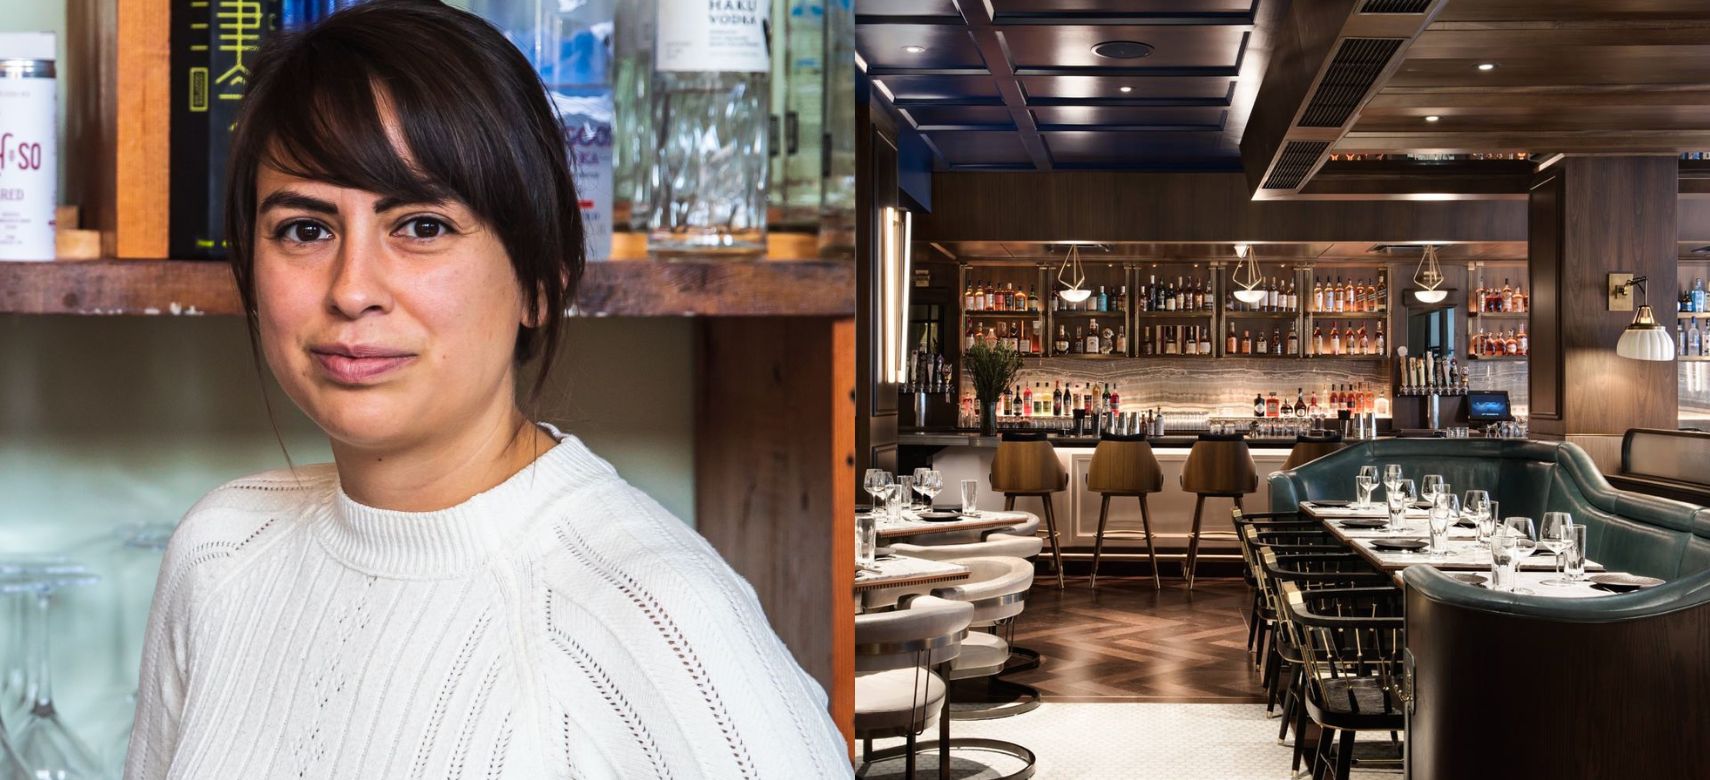 Photo for: Julieta Campos, Beverage Director at The Fifty/50 Group Joins The Judging Panel